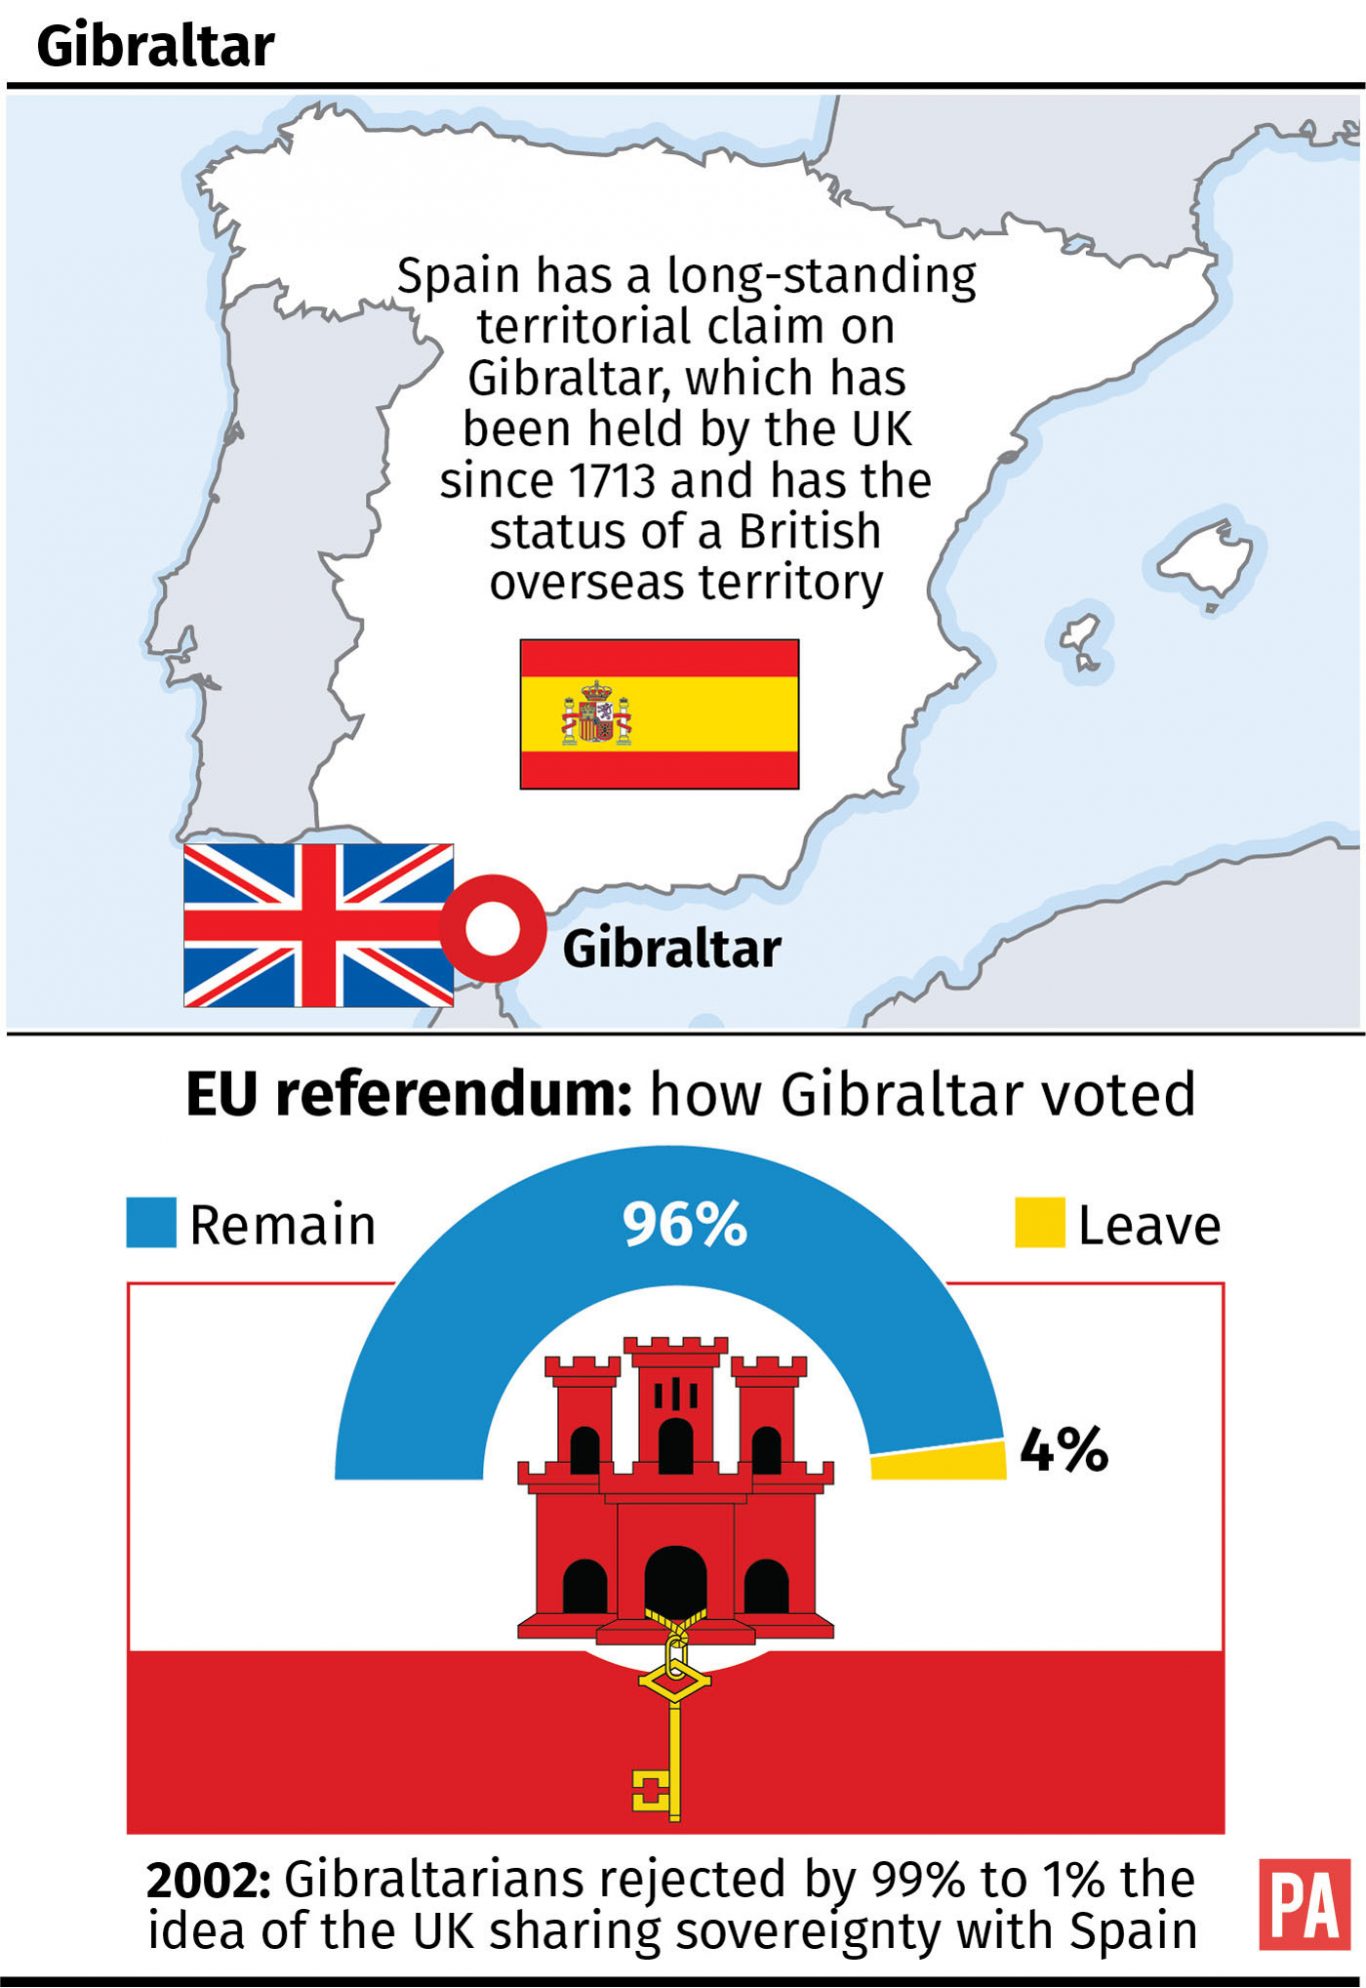 How Gibraltar voted in the EU referendum